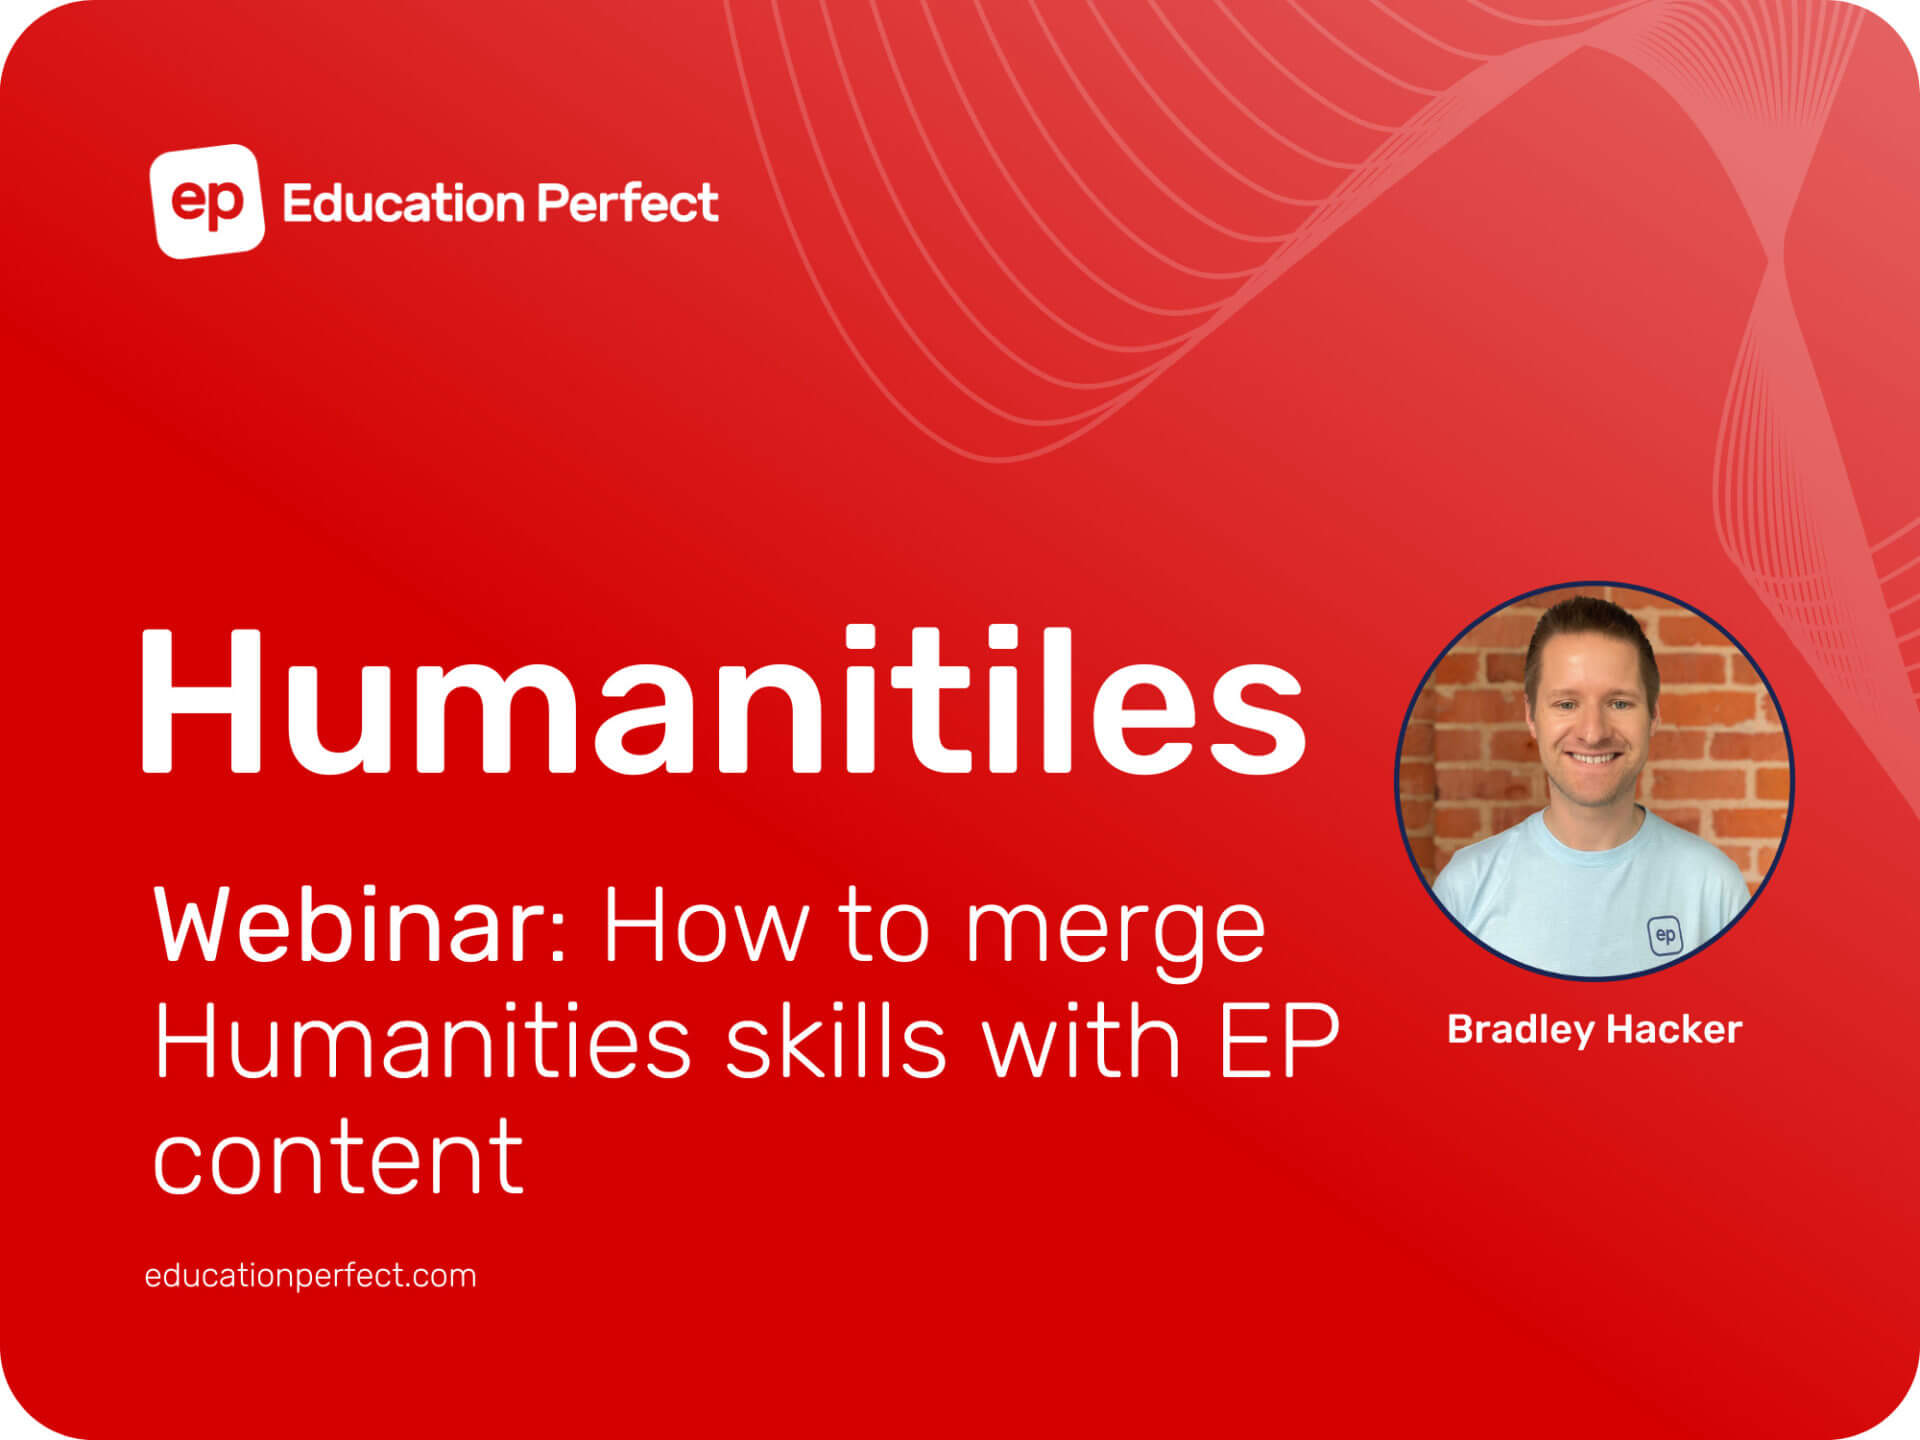 How to merge Humanities skills with EP content